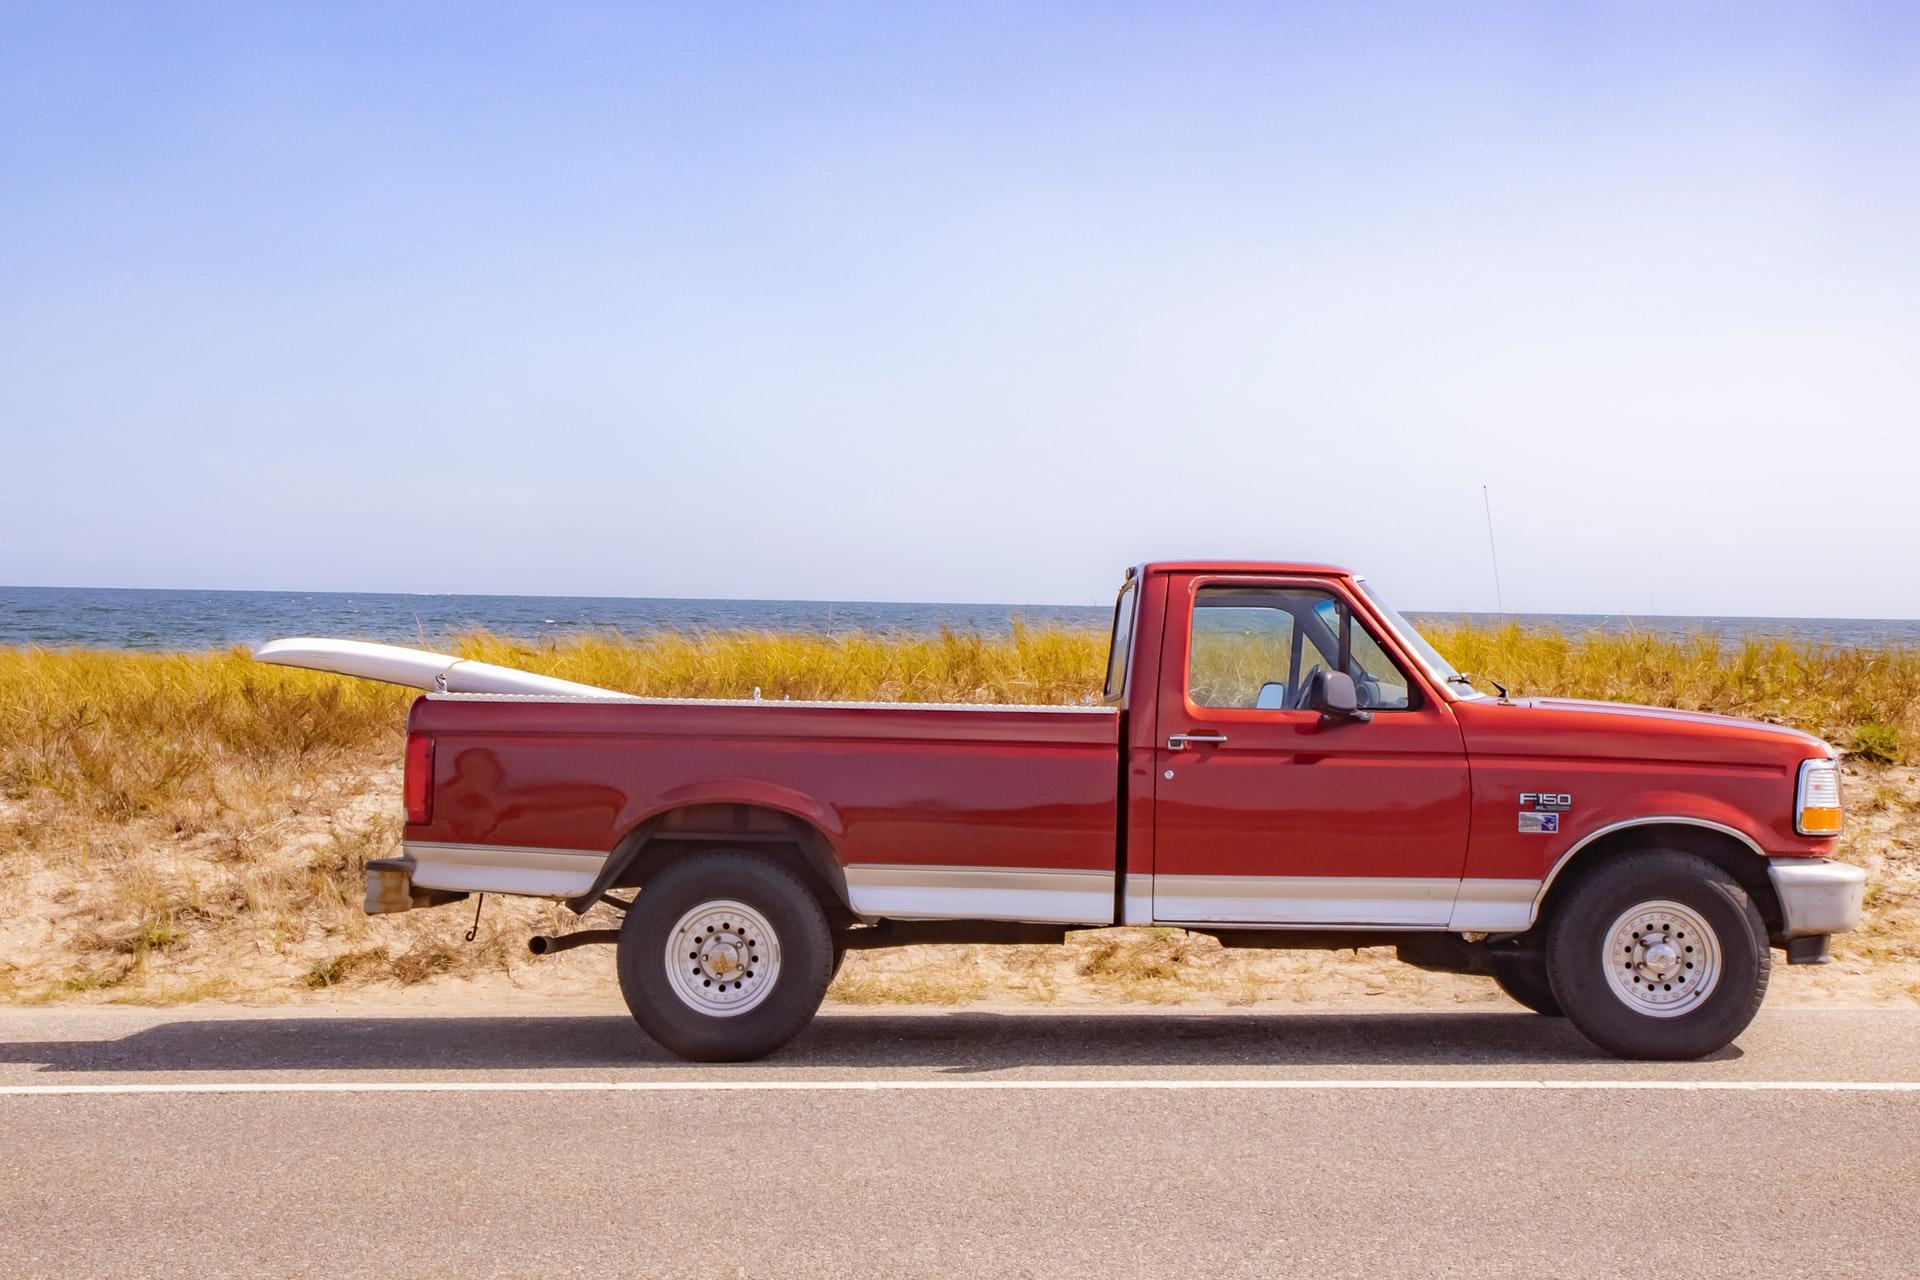 There aren’t any six-door pickup trucks coming off a production line, but they do exist.